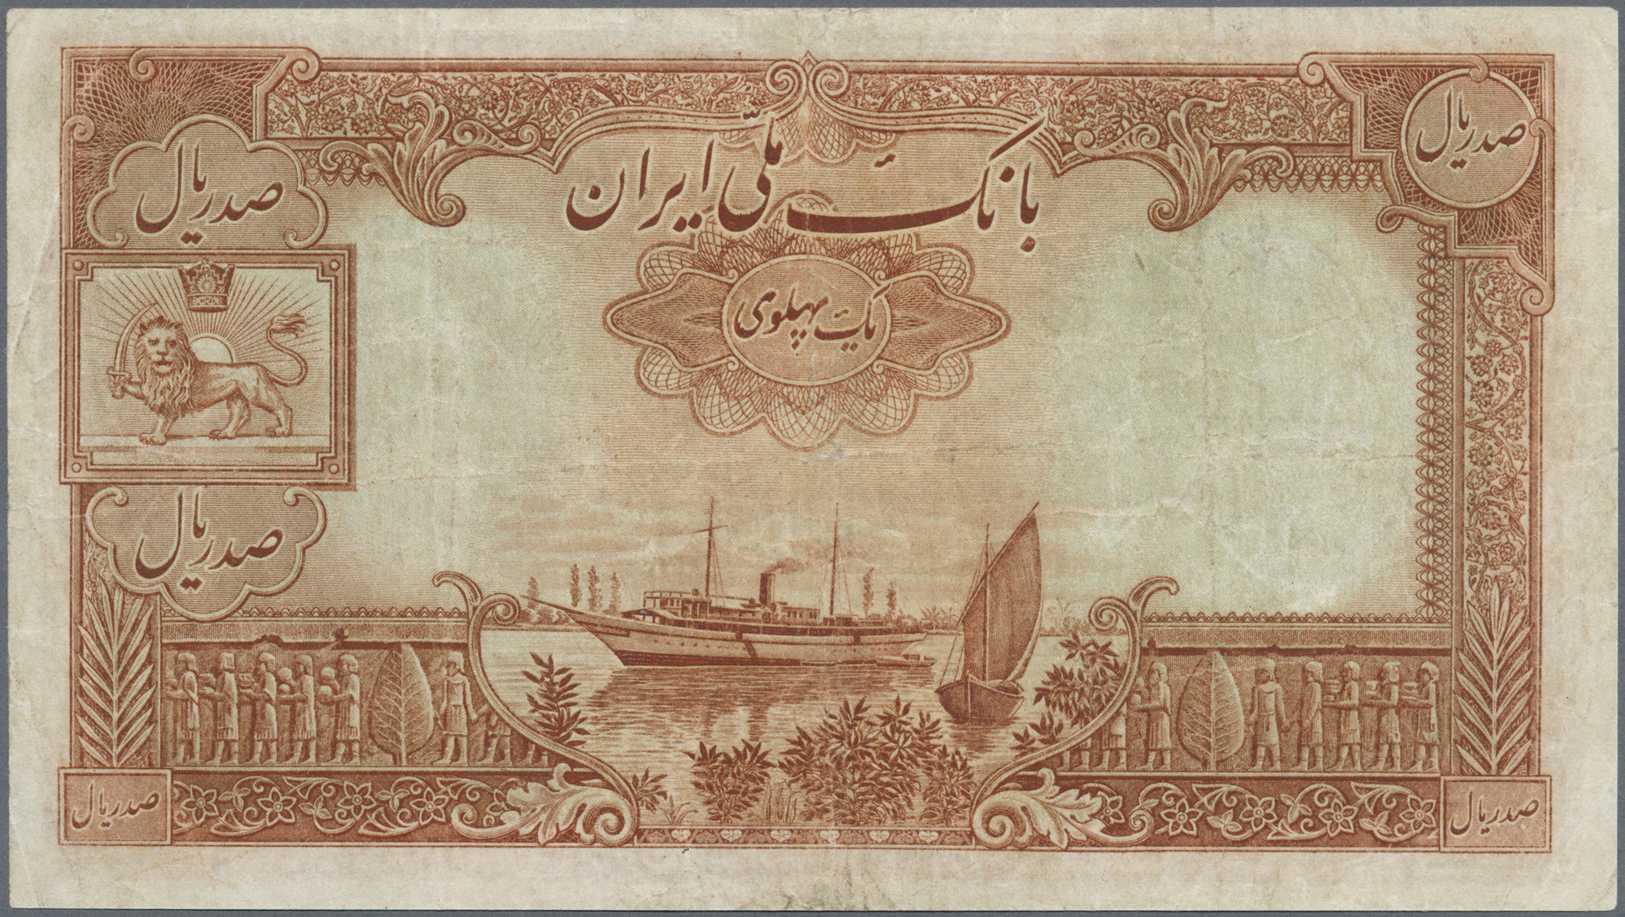 01212 Iran: Set Of 2 Notes 100 Rials ND P. 36A And 36, Both Used With Folds And Creases, Both Pressed, The P. 36A With C - Iran